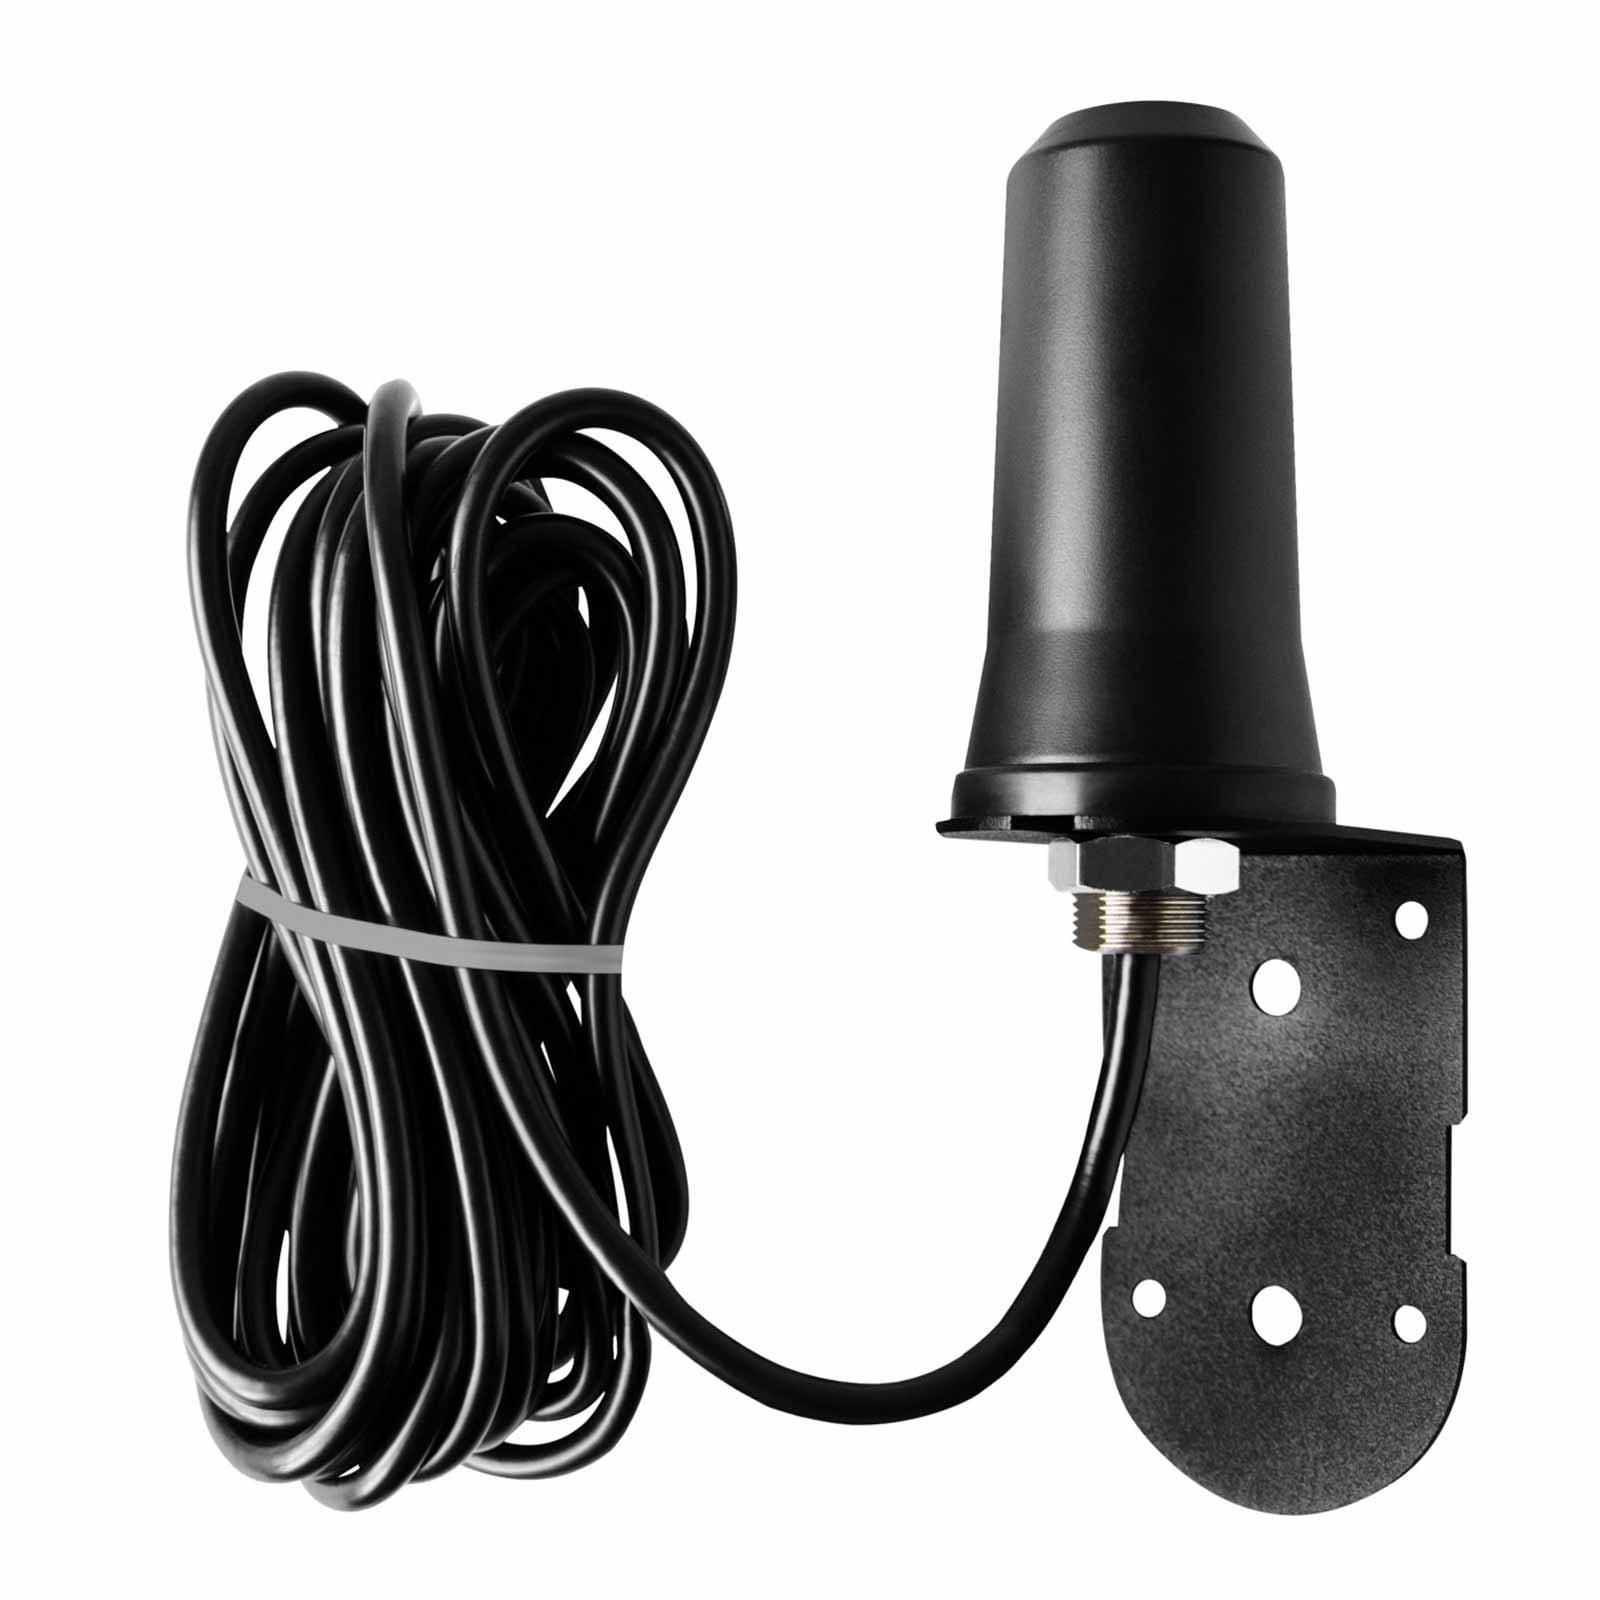 Spypoint Ca-01 Antenna for trail cameras